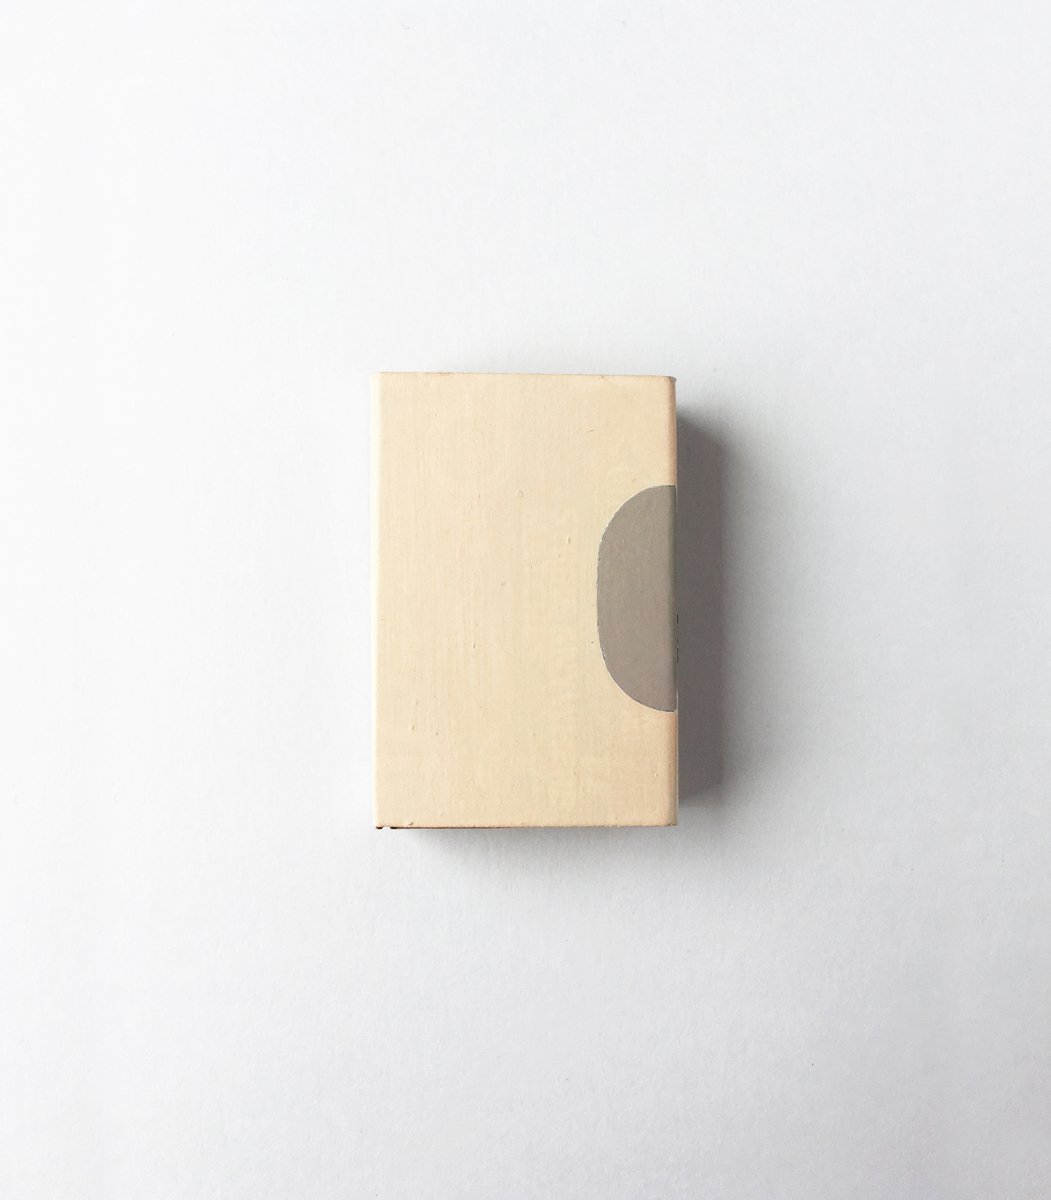 A matchbox with a bisected oval painted on one edge in taupe on cream.